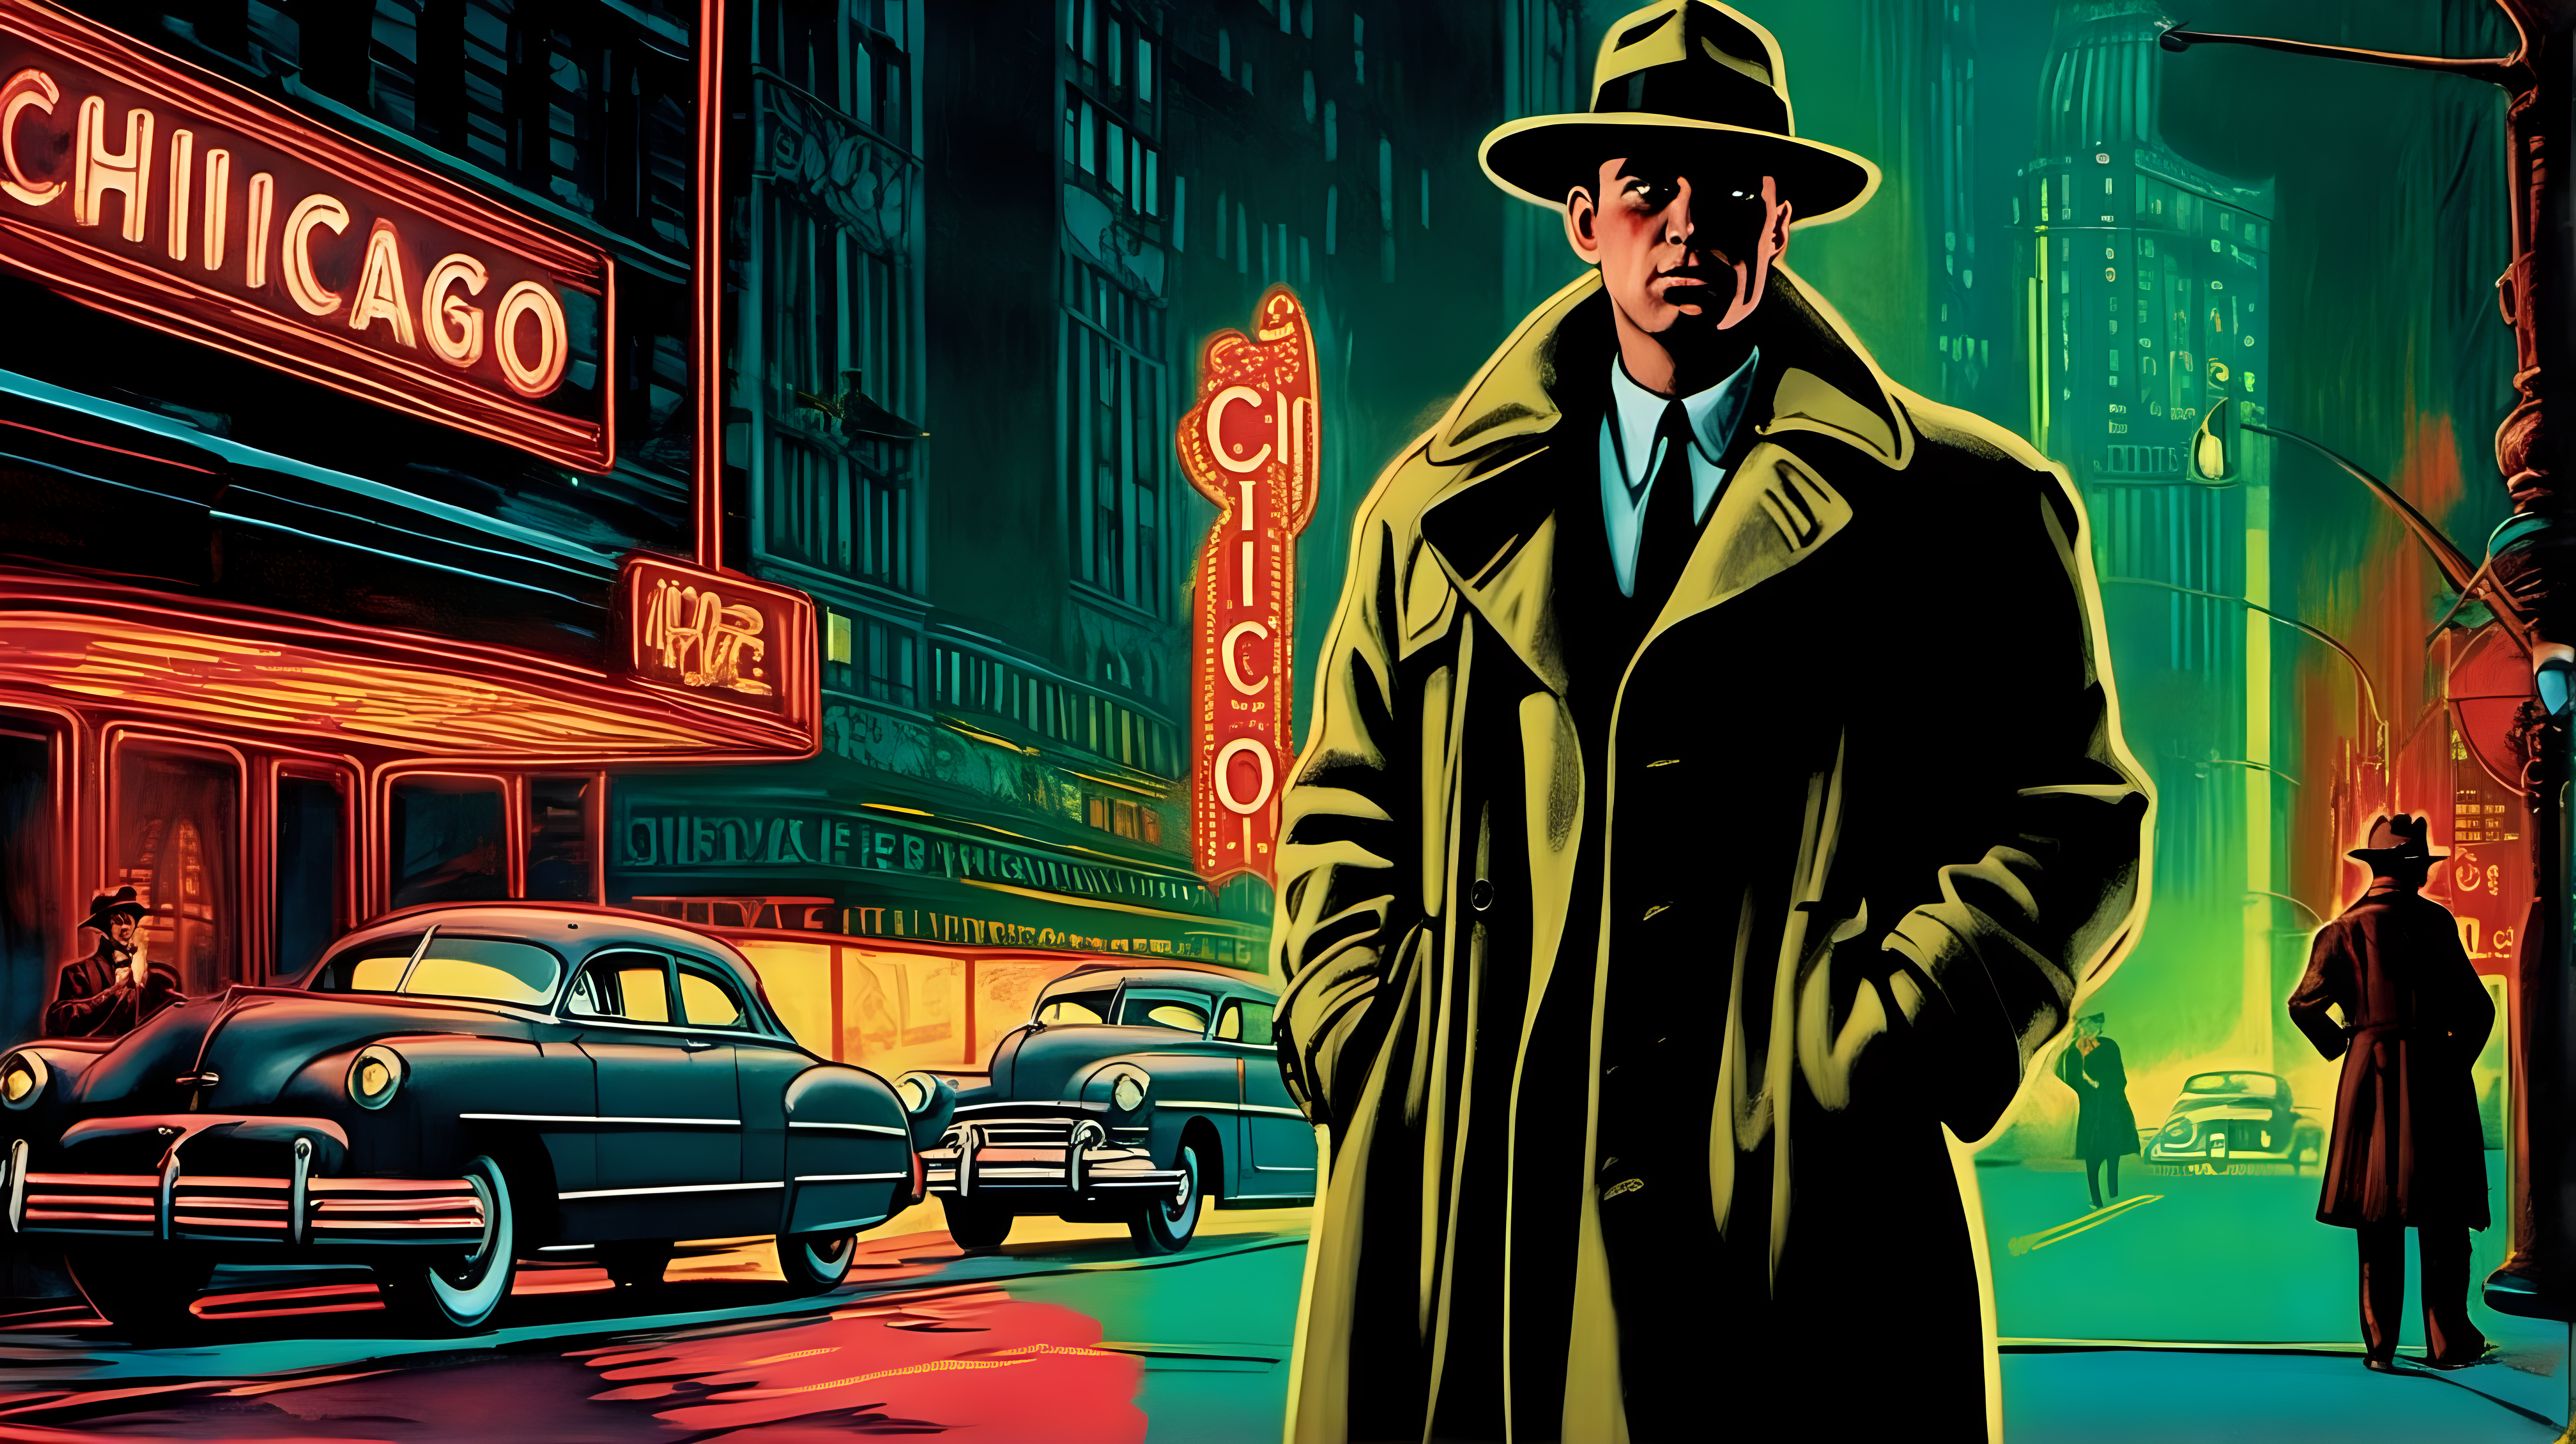 A man in the foreground with a rifle, wearing a trenchcoat and fedora, staring at the camera on a downtown neon Chicago street, circa 1950. Art Nouveau style.